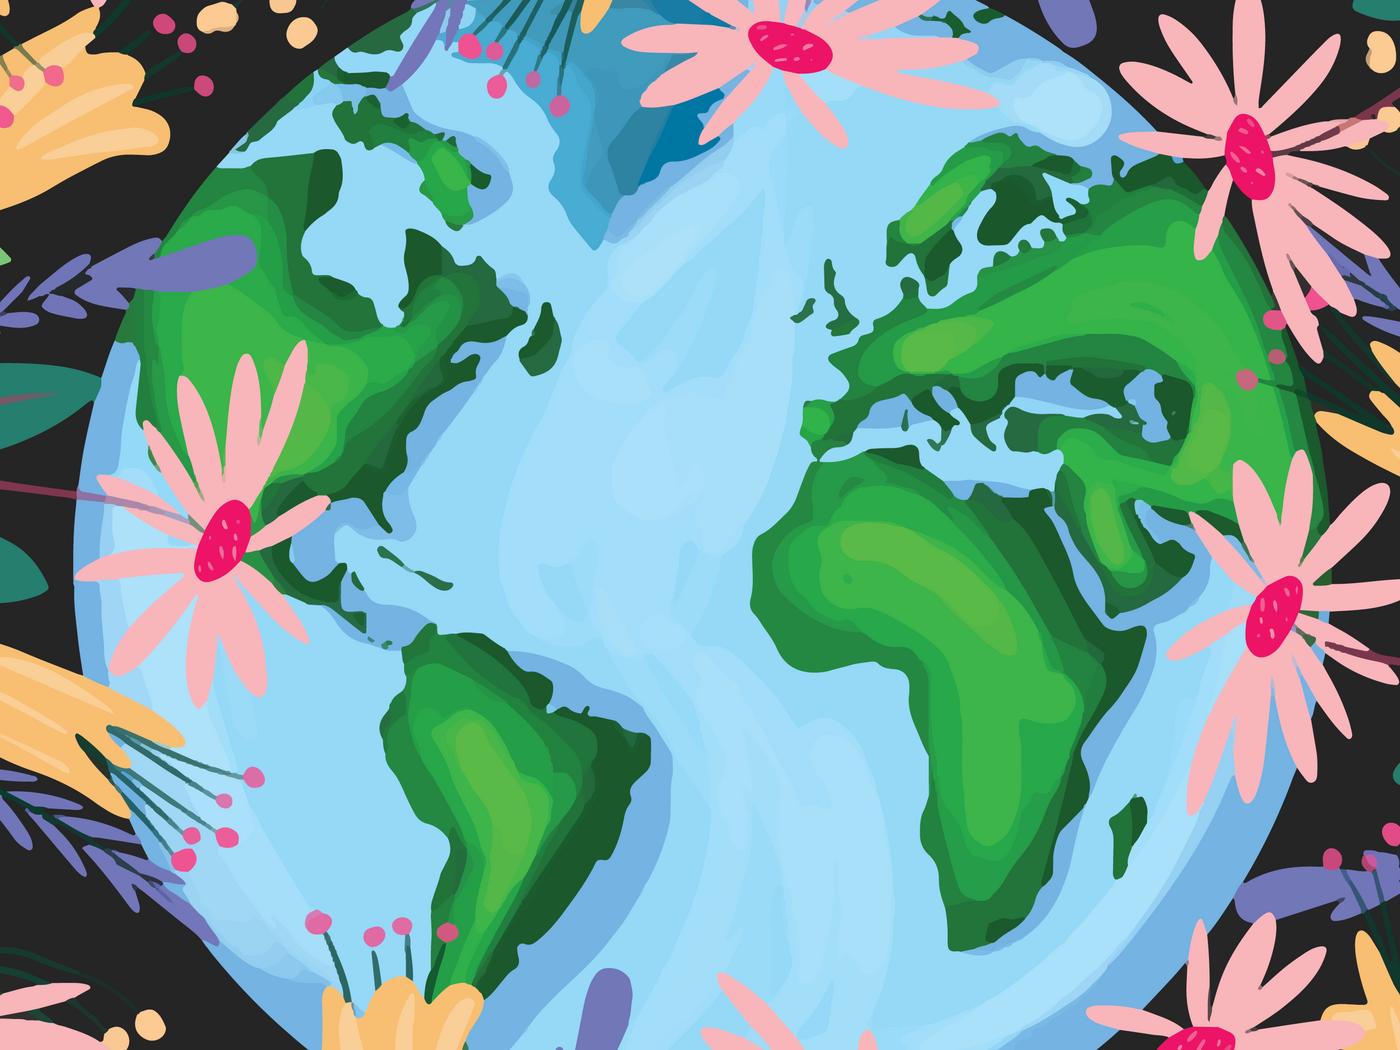 A graphic of a globe surrounded by flowers.